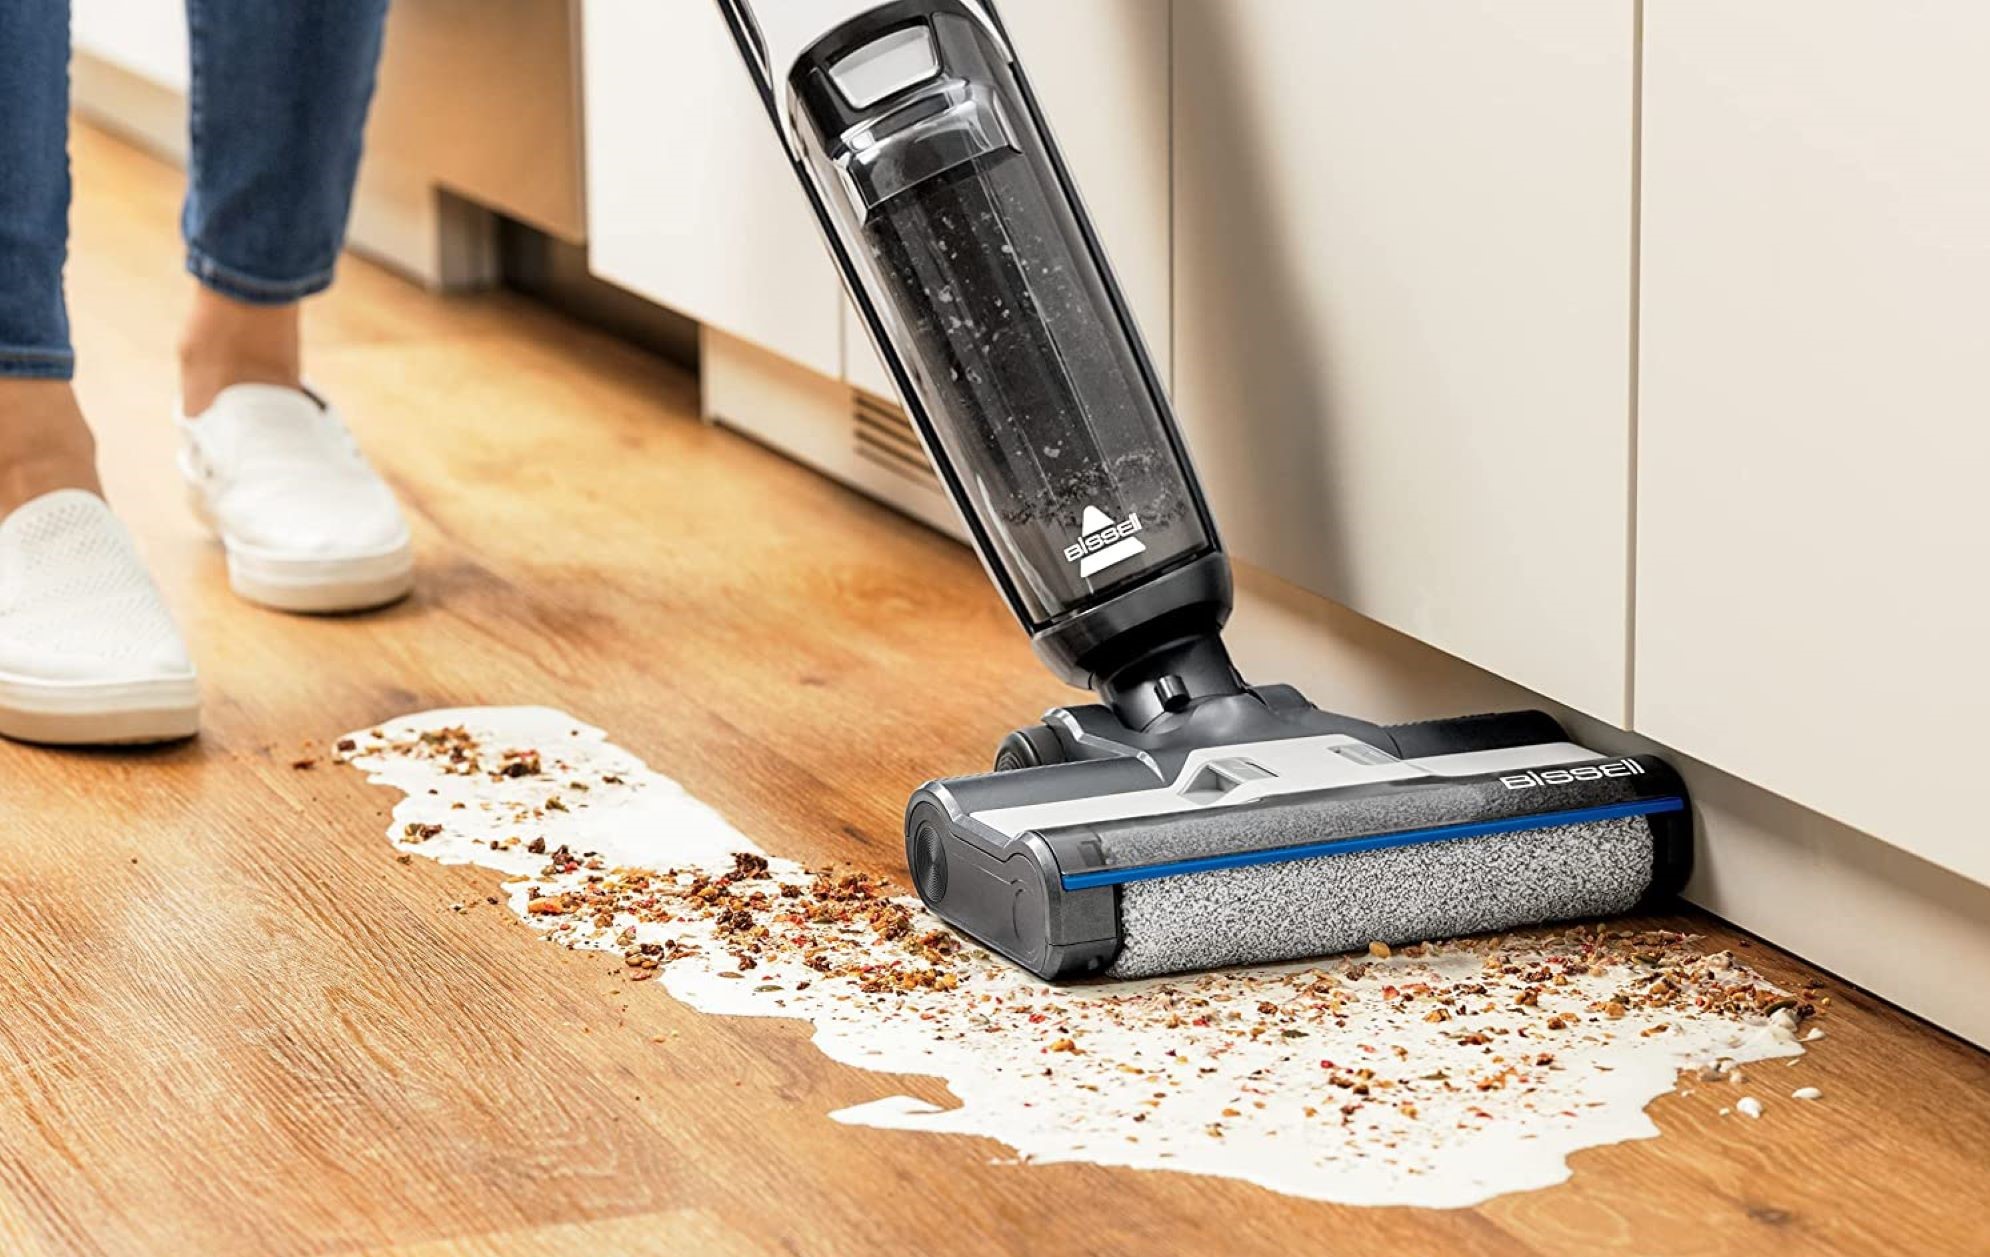 Bissell Crosswave vacuum mop cleaning up a mess